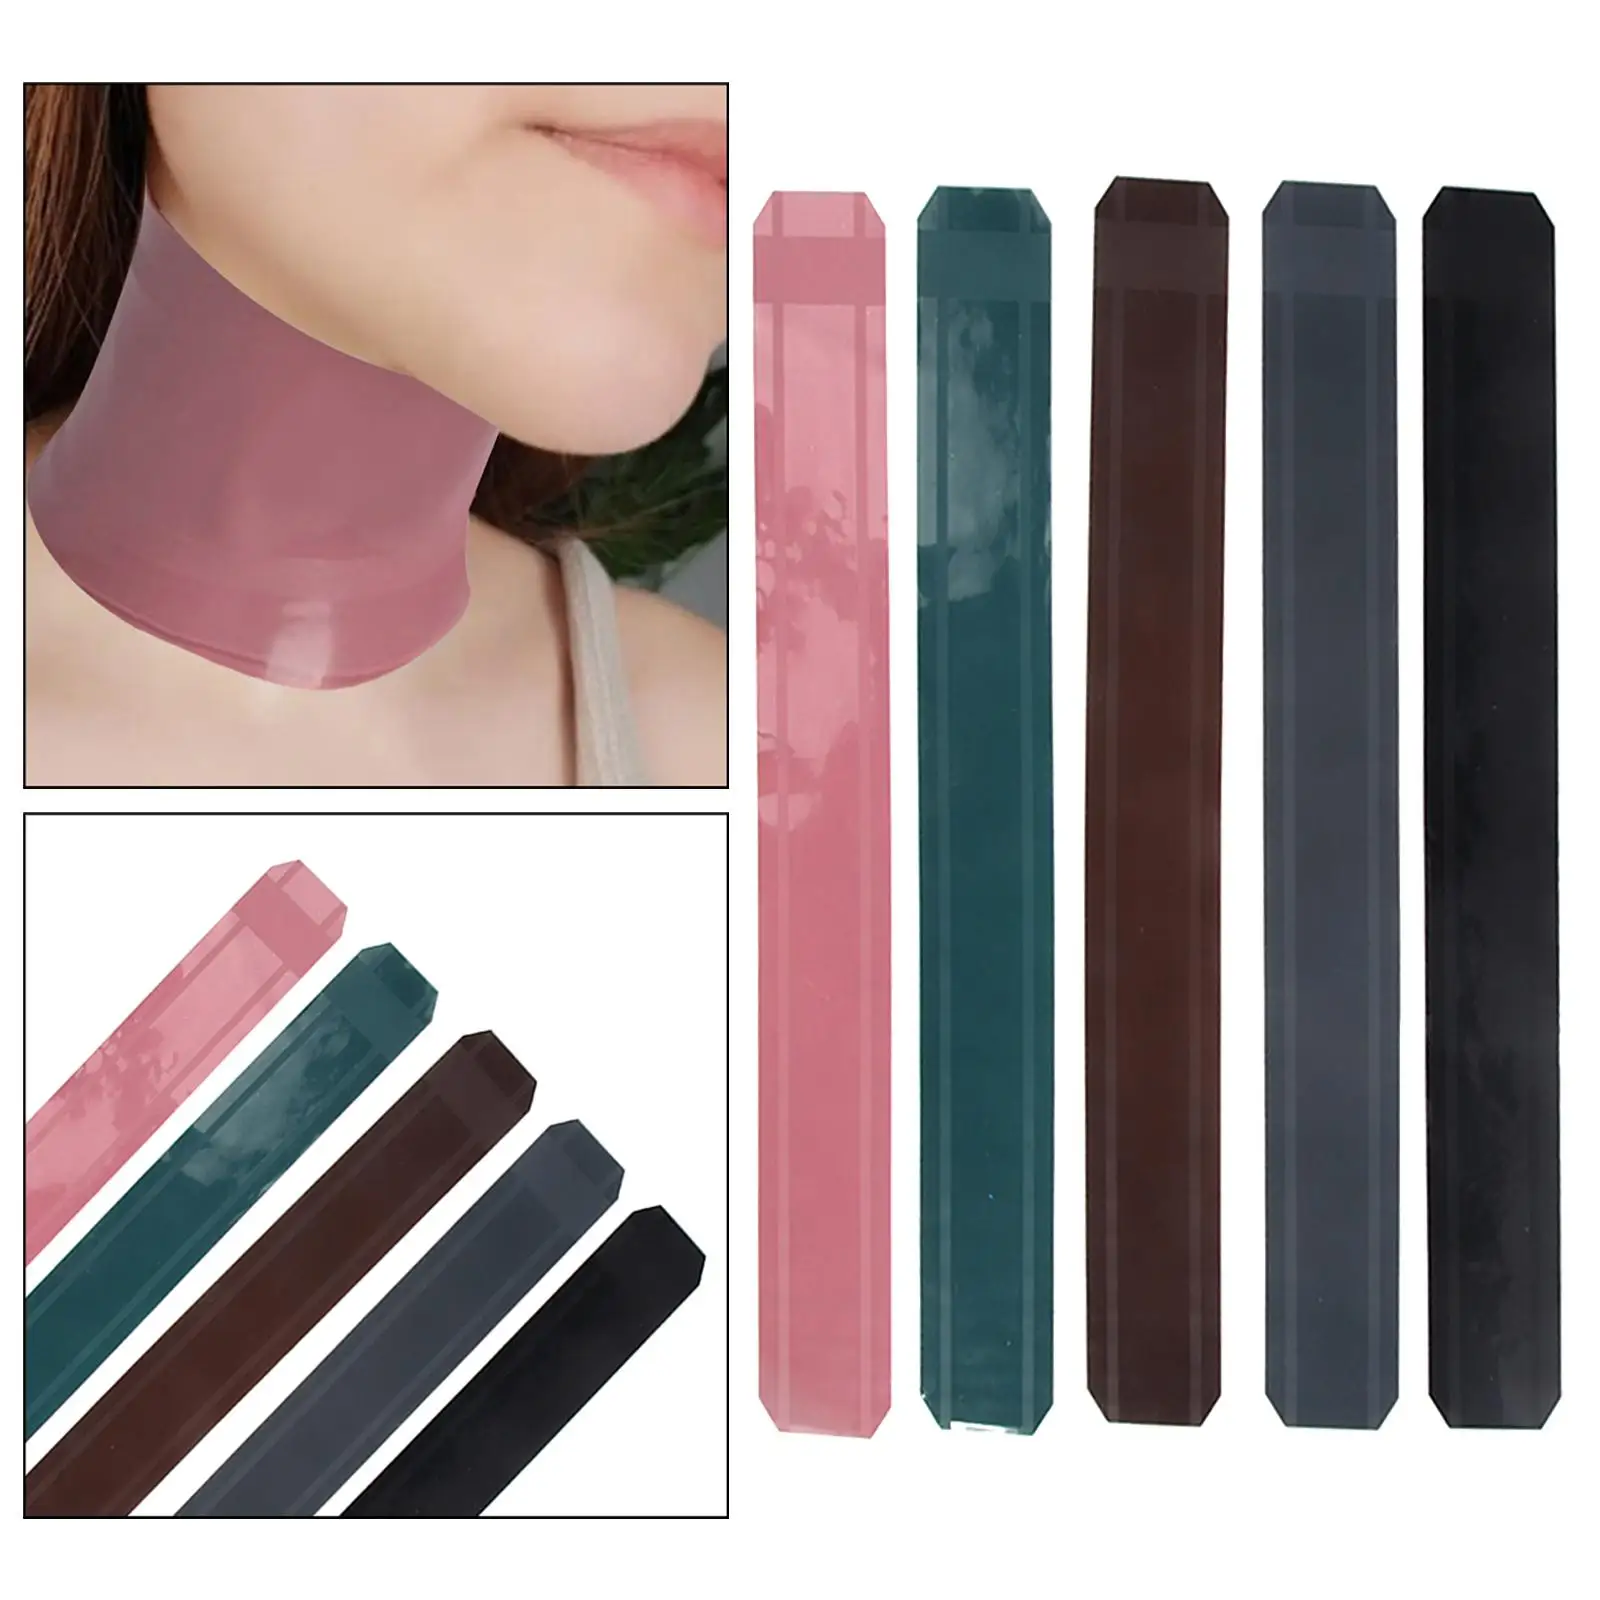 5x Hair Cutting Collar Portable Waterproof Soft Silicone Neck Protector for Barber Salon Home Professional Haircut Neck Wrap